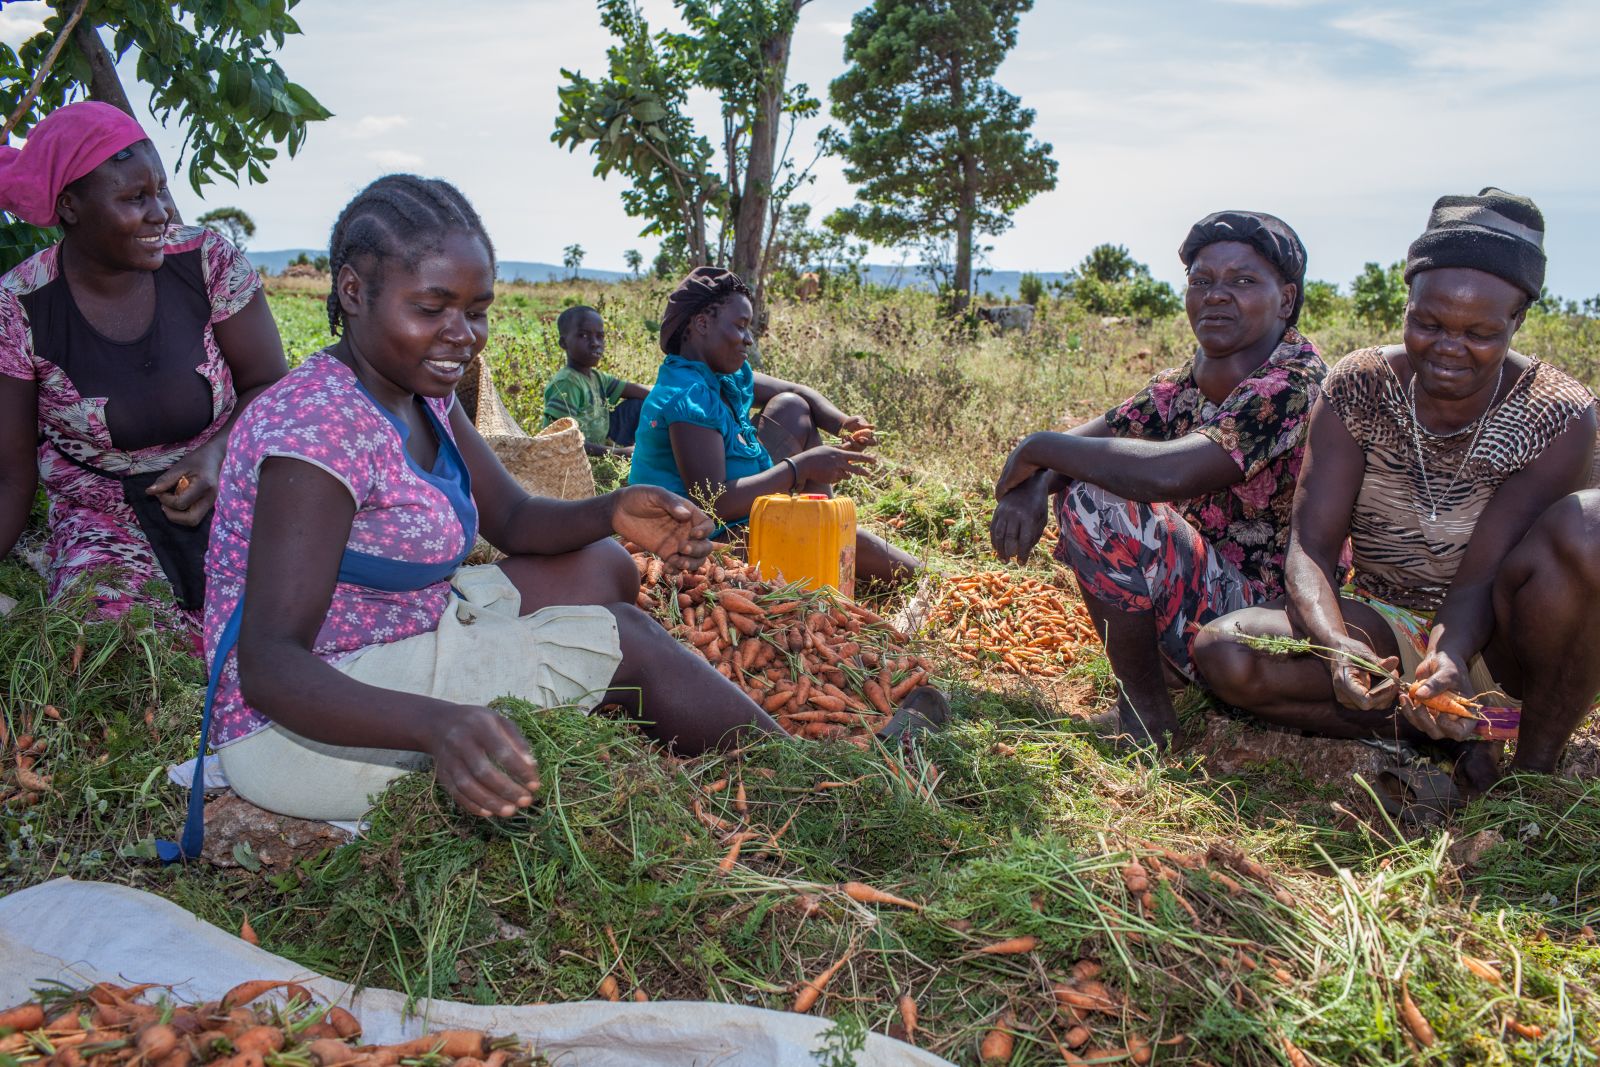 A group of women has bought the harvest of a farmer in Haiti. They harvest the carrots and sell them at the surrounding markets.